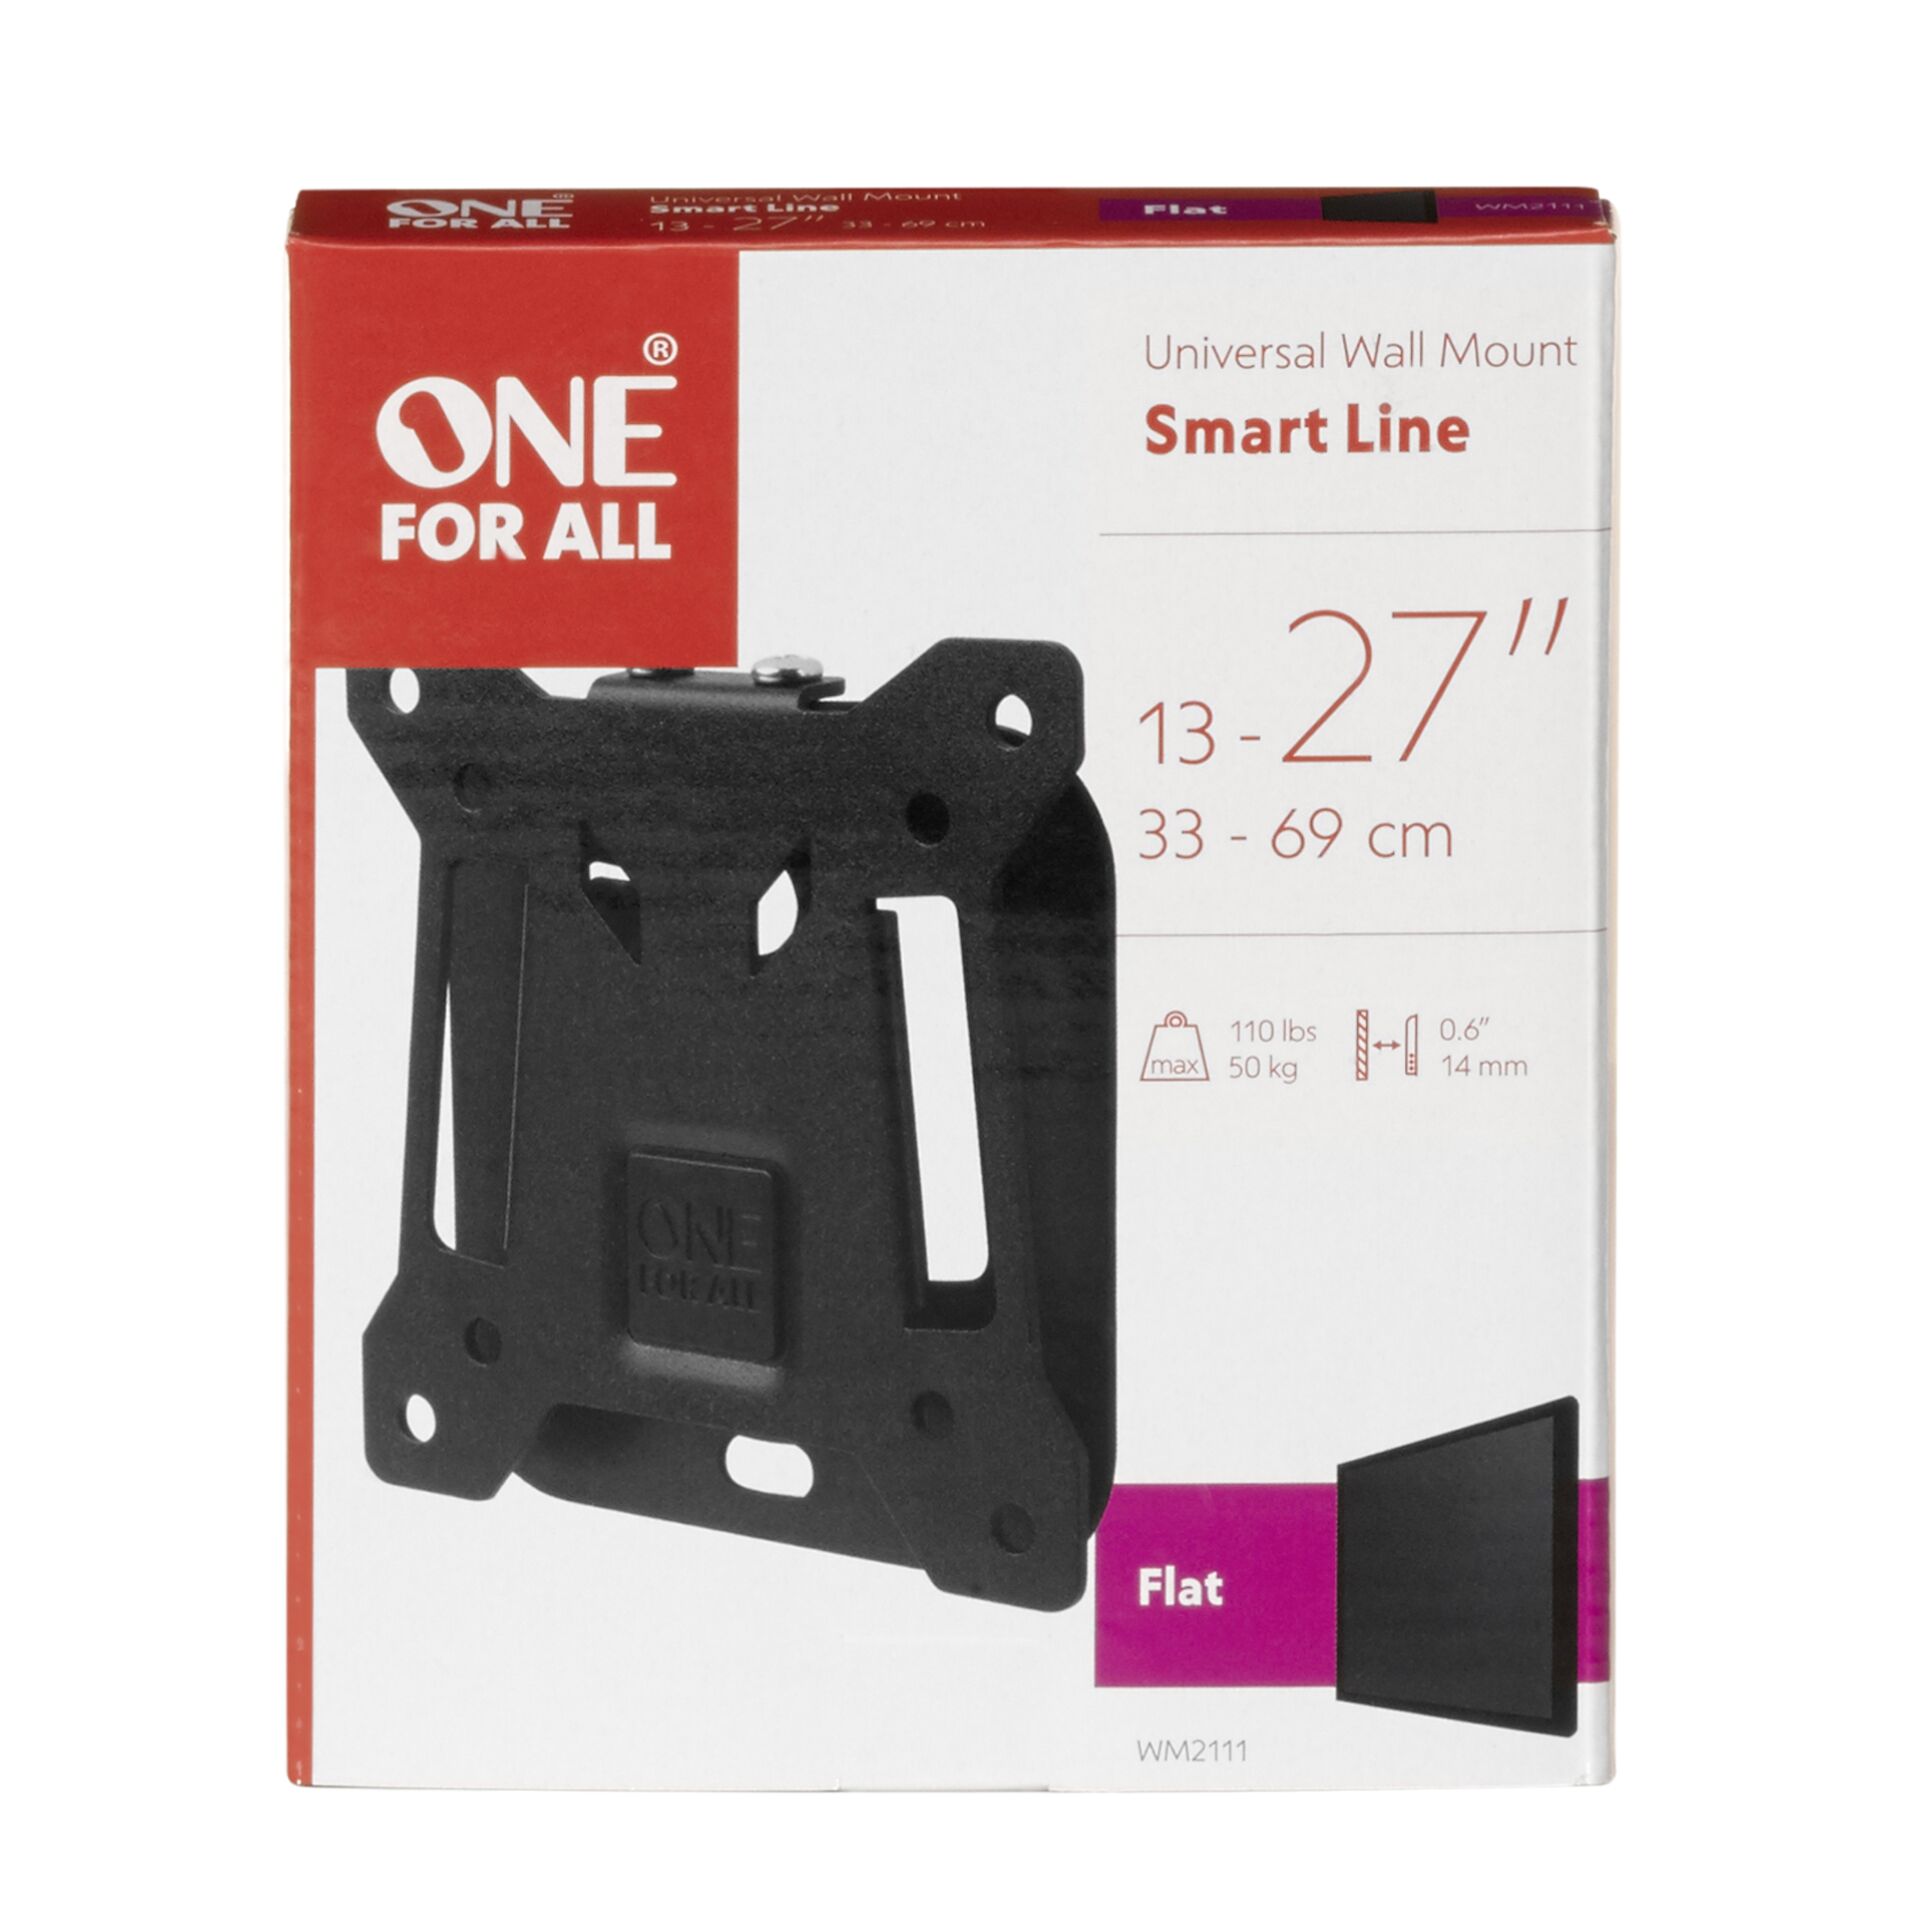 One for All TV Wall mount 27 Smart FLAT WM2111